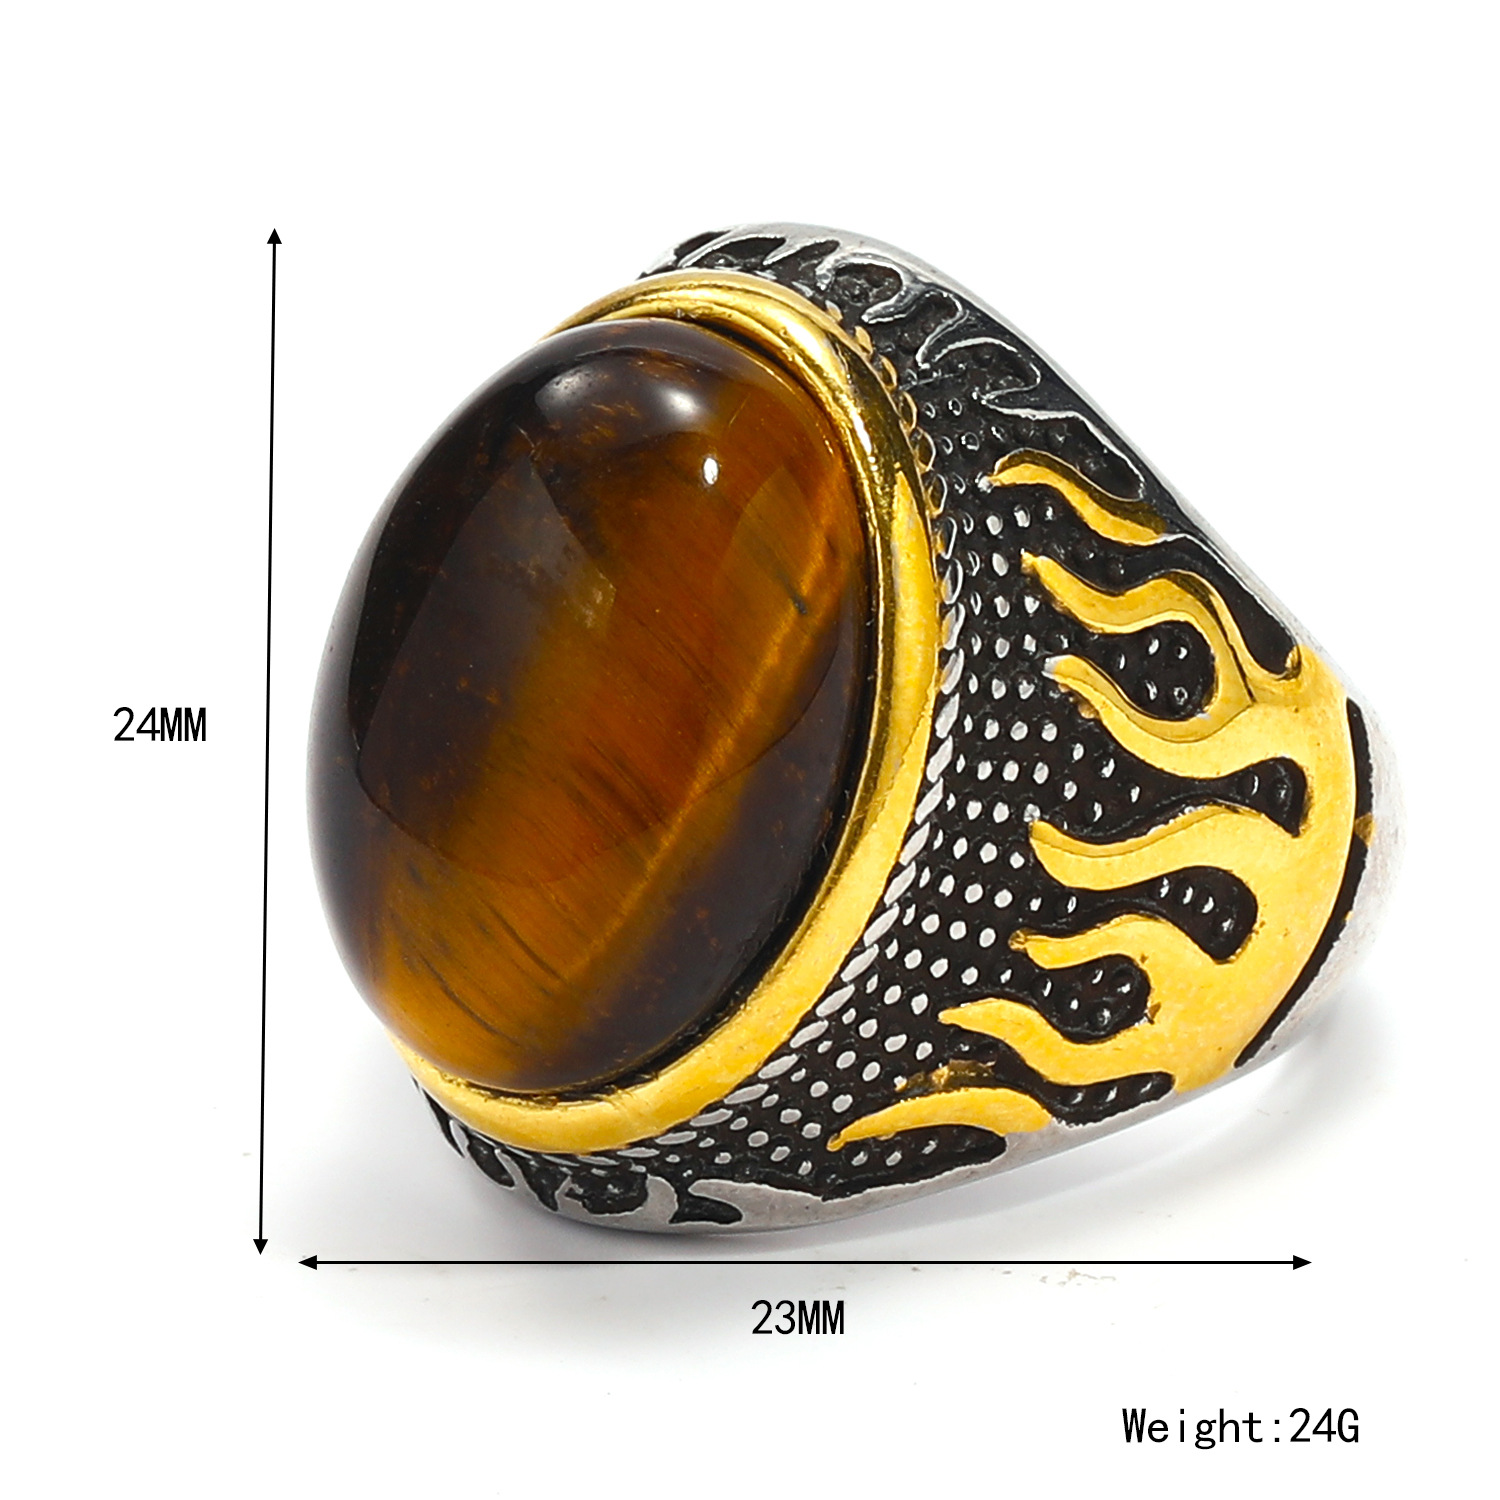 Steel and gold tiger's eye stone